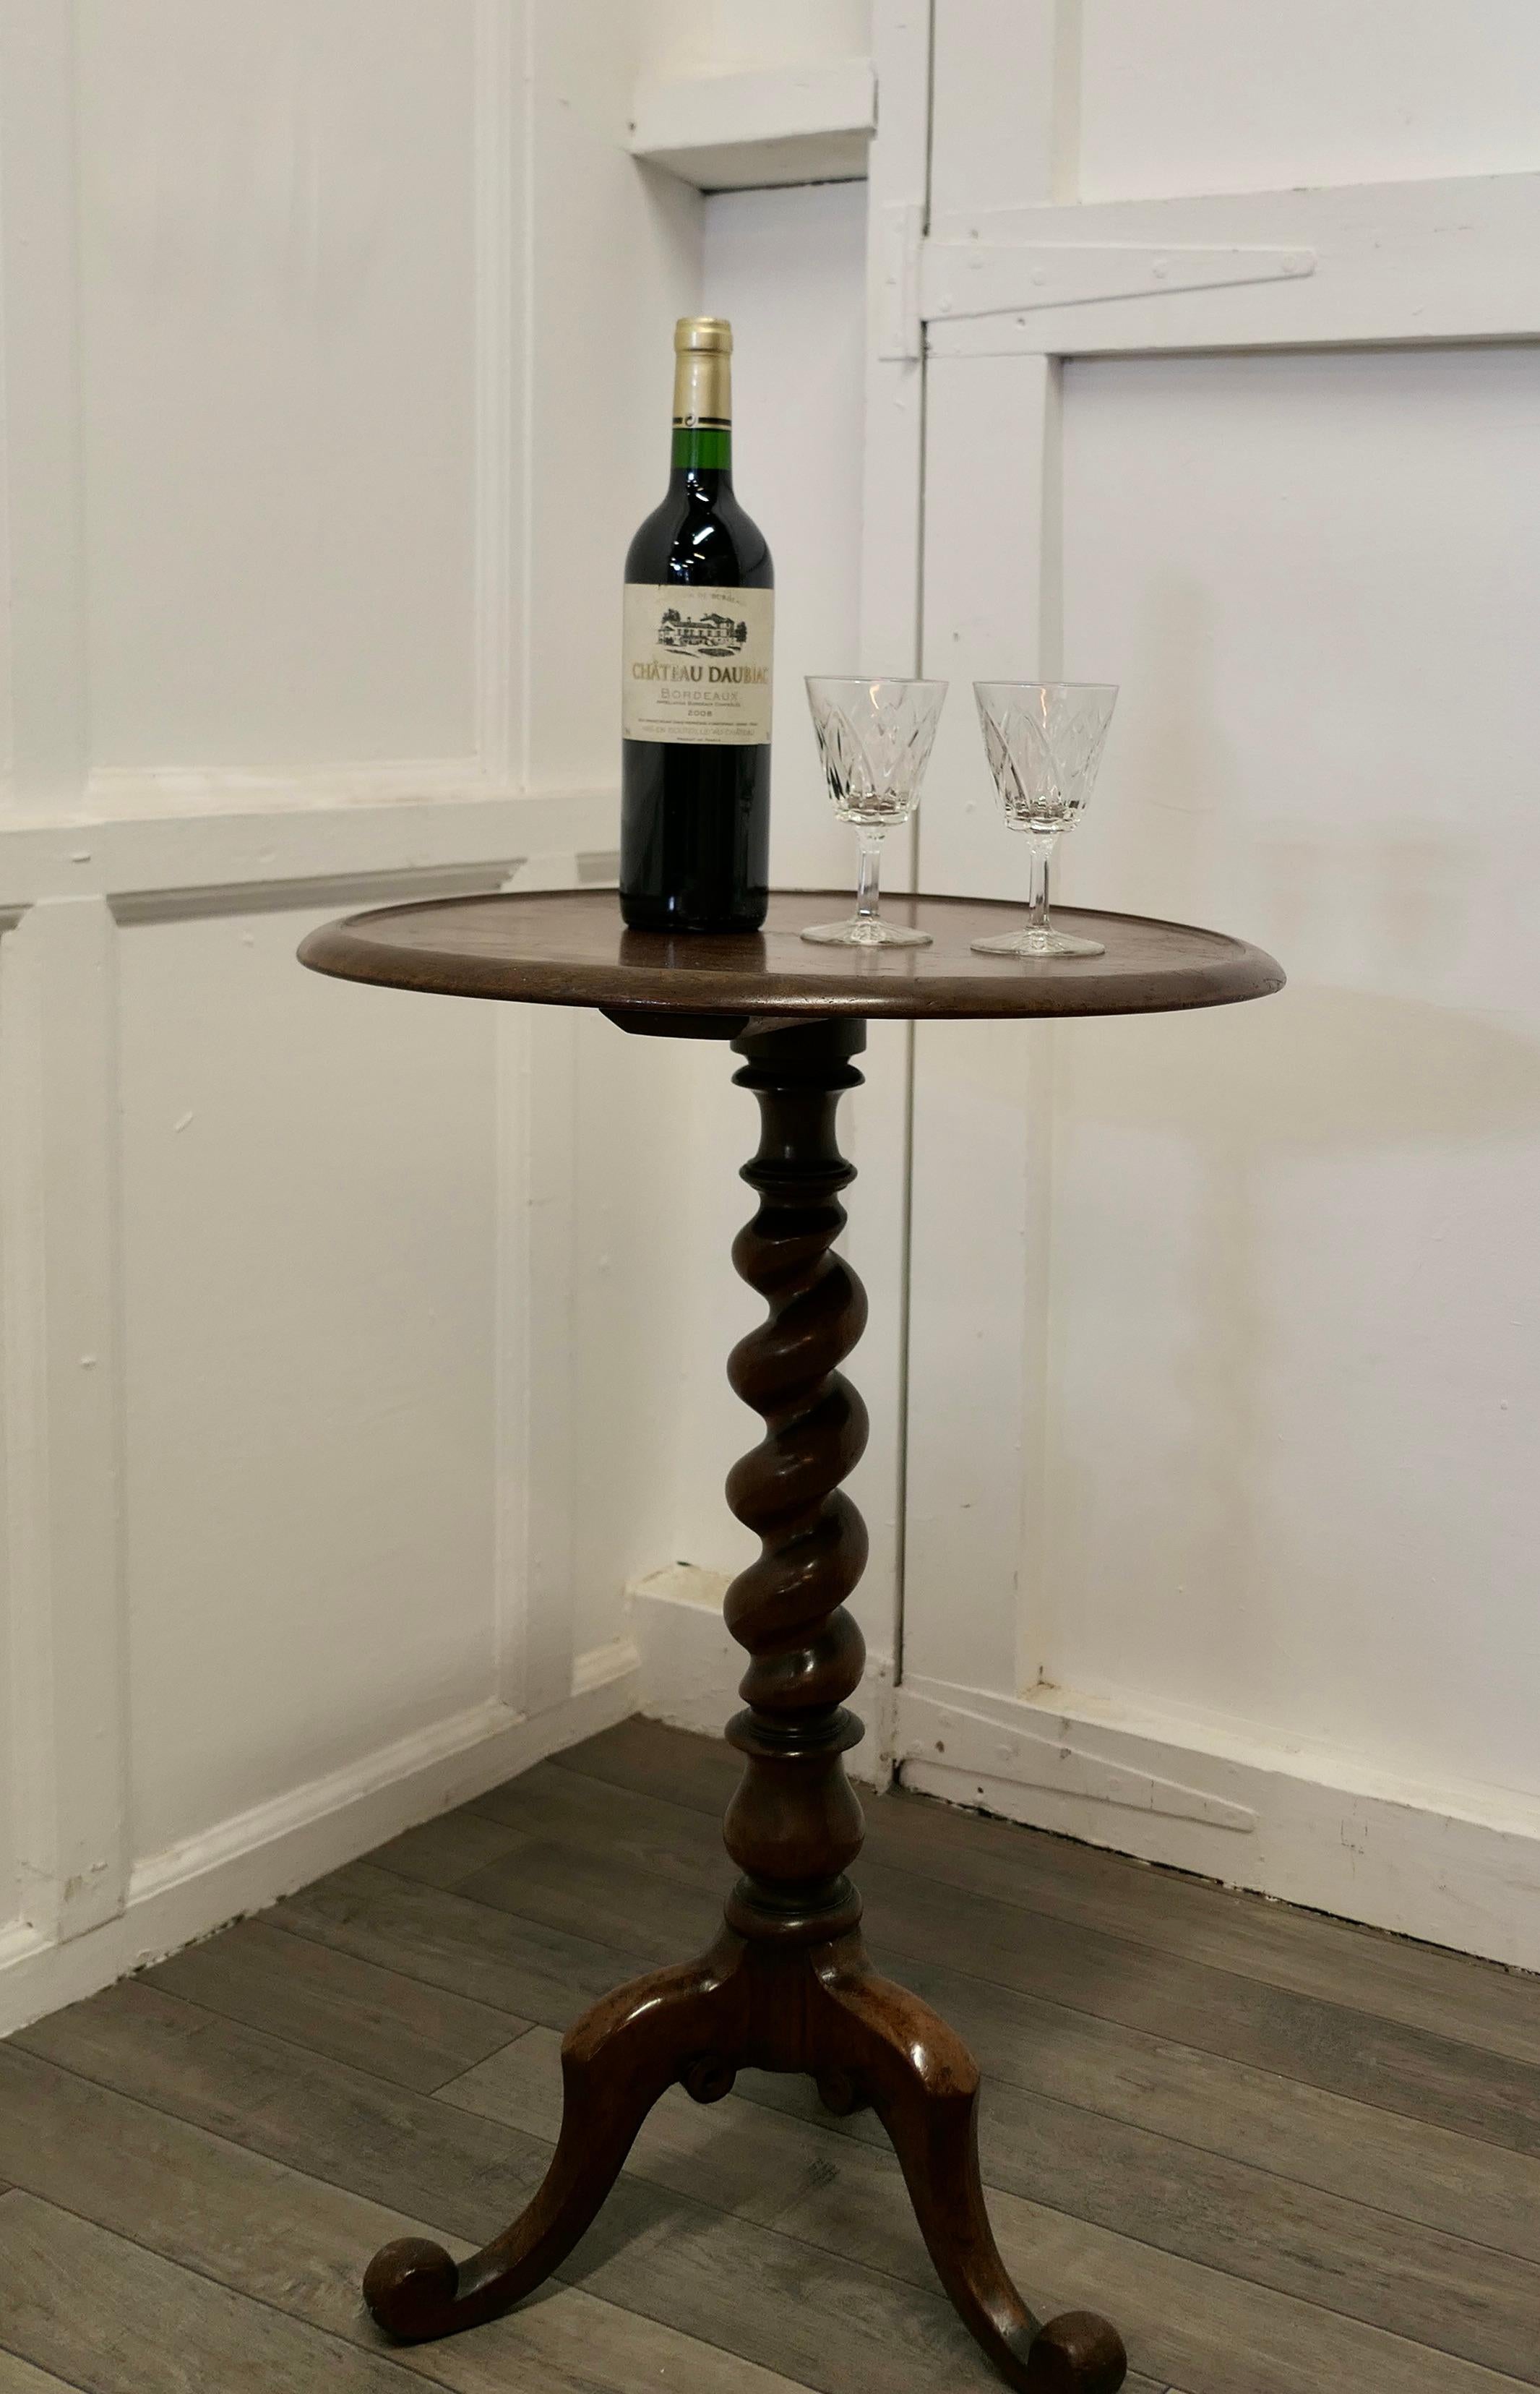 Chunky Victorian Wine Table or Occasional Lamp Table

This lovely table stands on a very attractive Barley Twist three footed leg
It has a solid round top which has a slightly raised edge 
The table is in good attractive condition, if you look